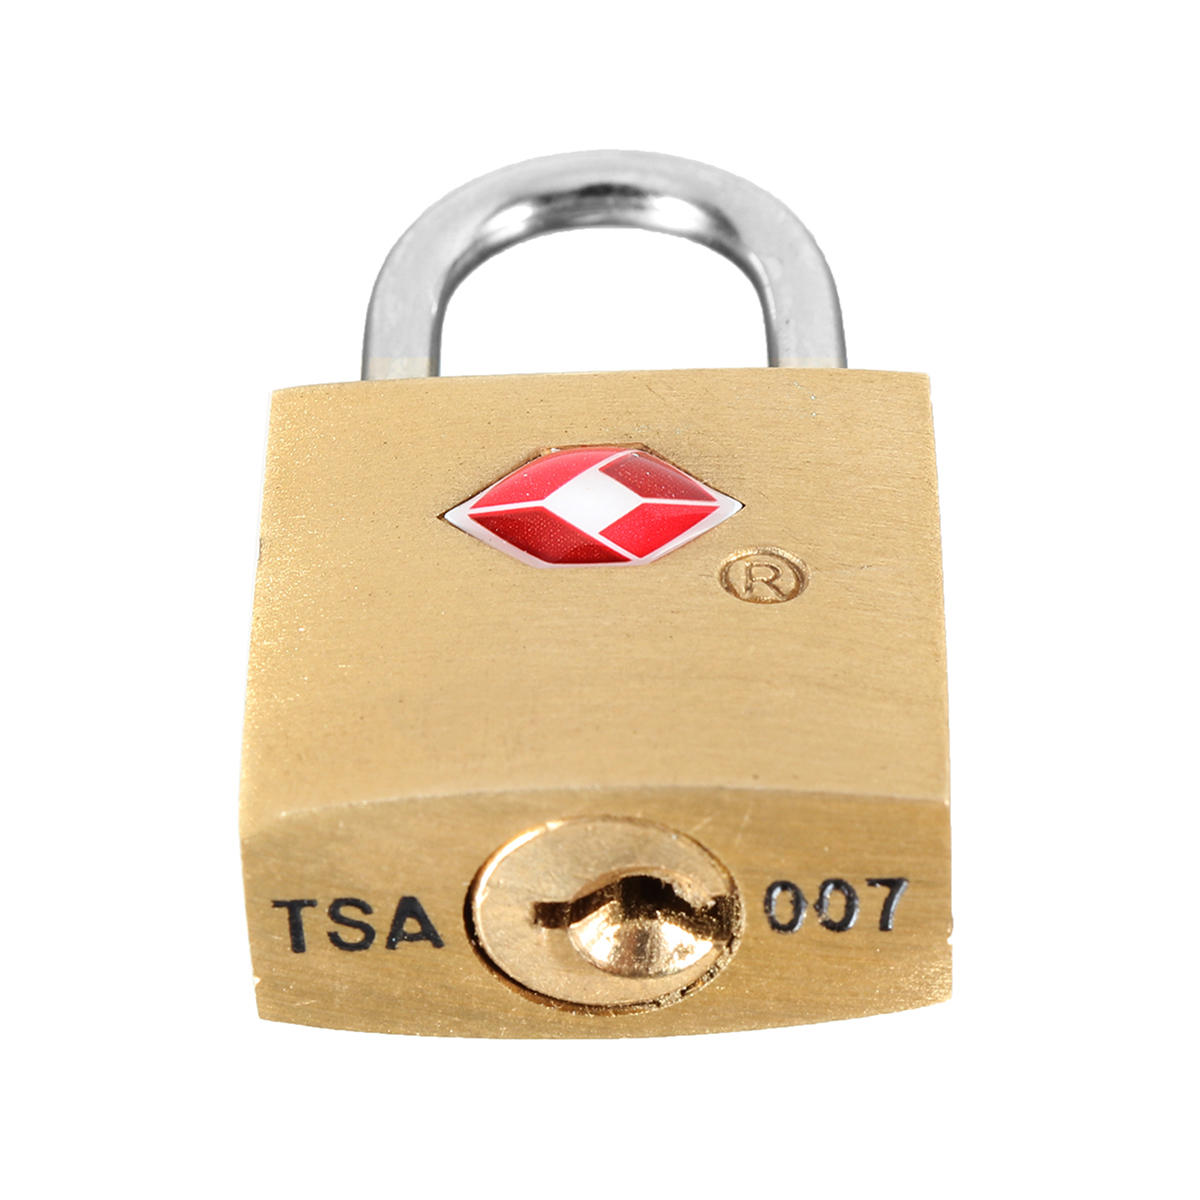 Approved Padlock Travel Security Luggage Solid Brass Key Door Lock